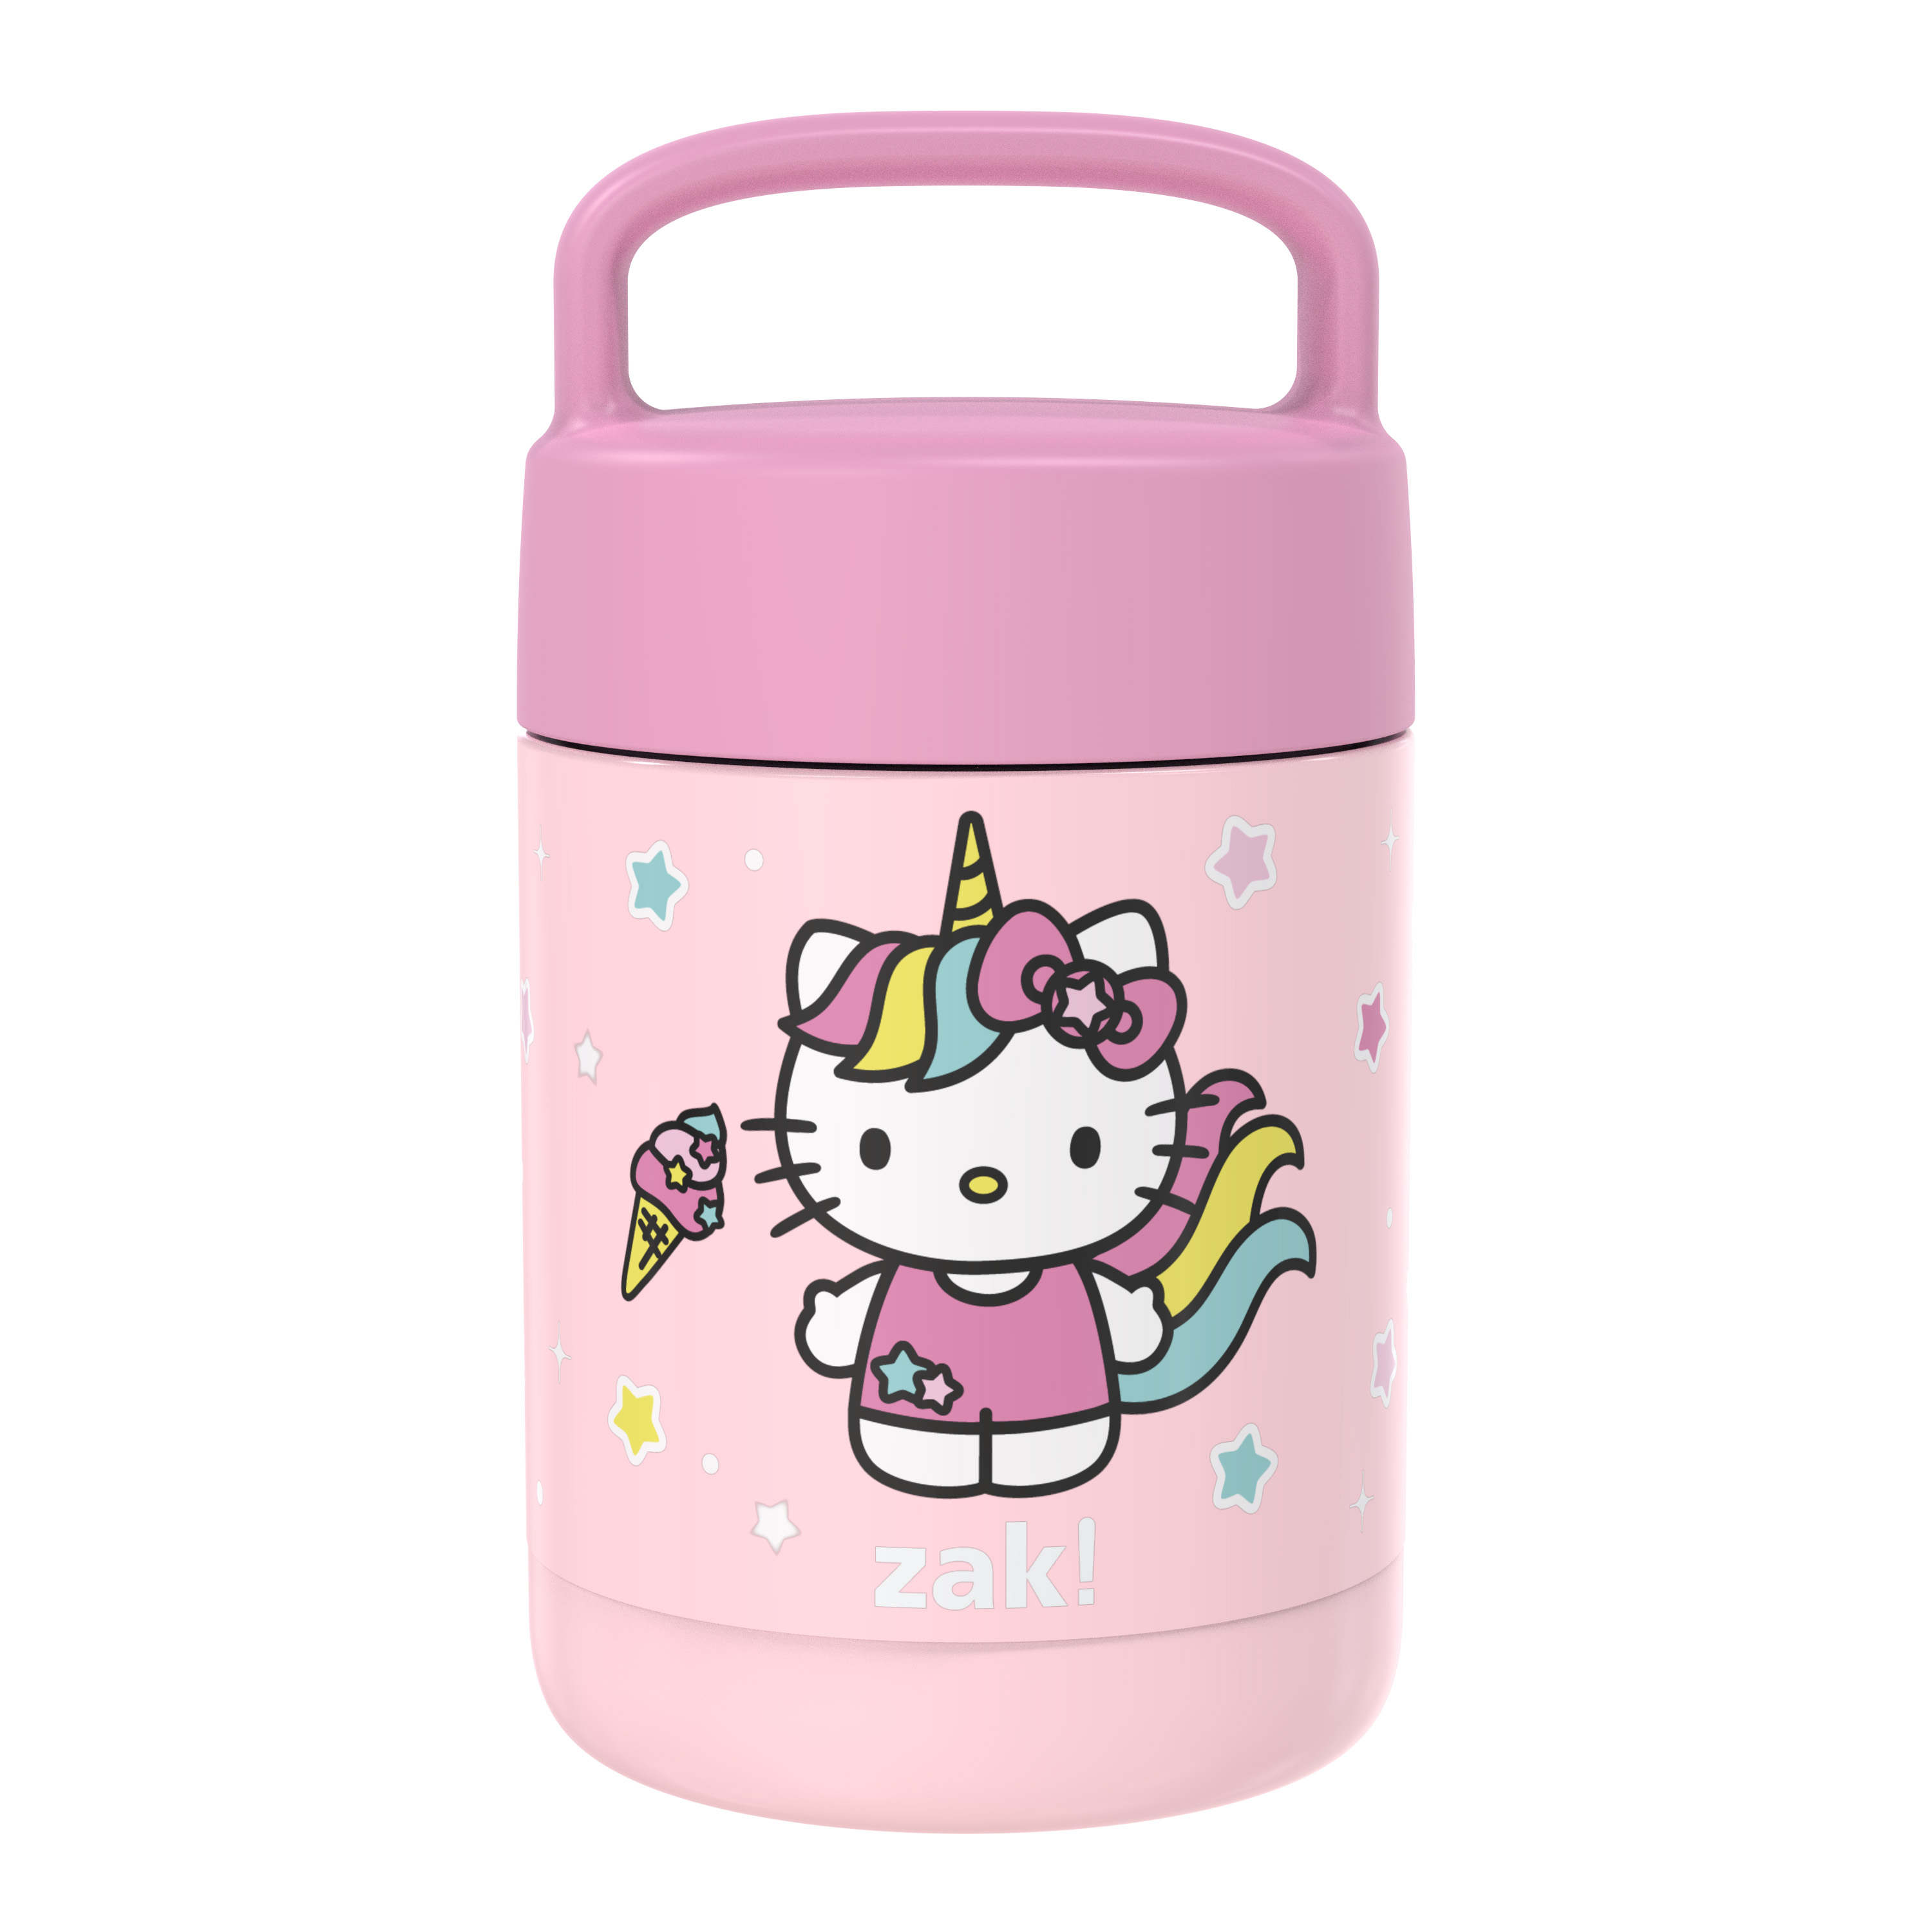 Sanrio Reusable Vacuum Insulated Stainless Steel Food Container, Hello Kitty slideshow image 1